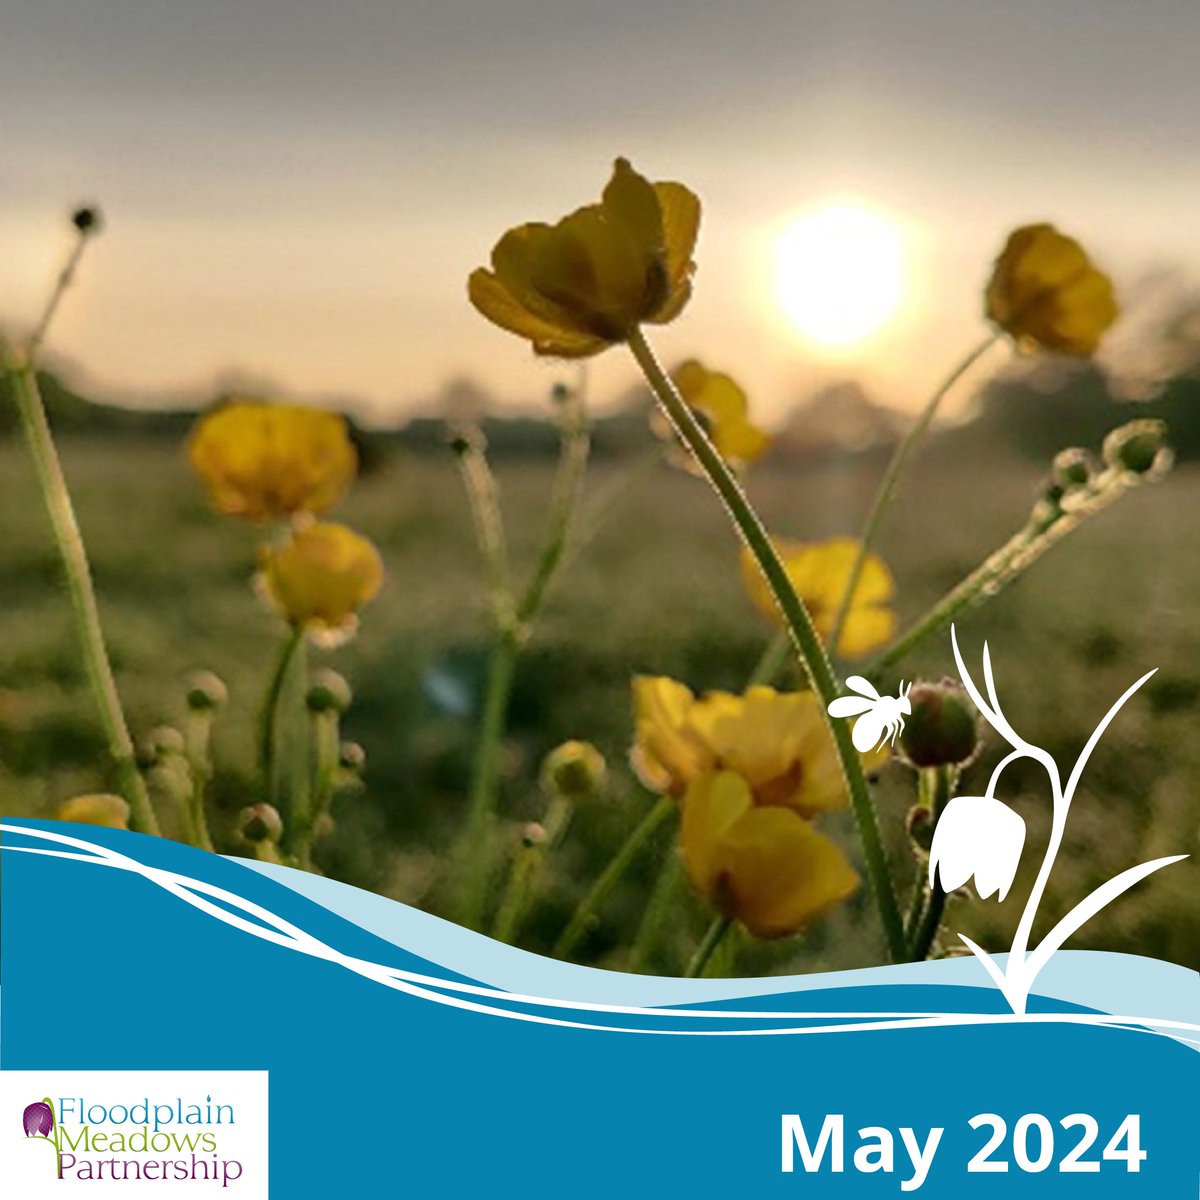 What’s happening in #FloodplainMeadows in May? Once the floods subside, plants will be growing thick and fast now for the spring flush. Golden buttercups and shaggy meadow foxtail flowers are in the mix. 🌱🌼 floodplainmeadows.org.uk/discover/learn…